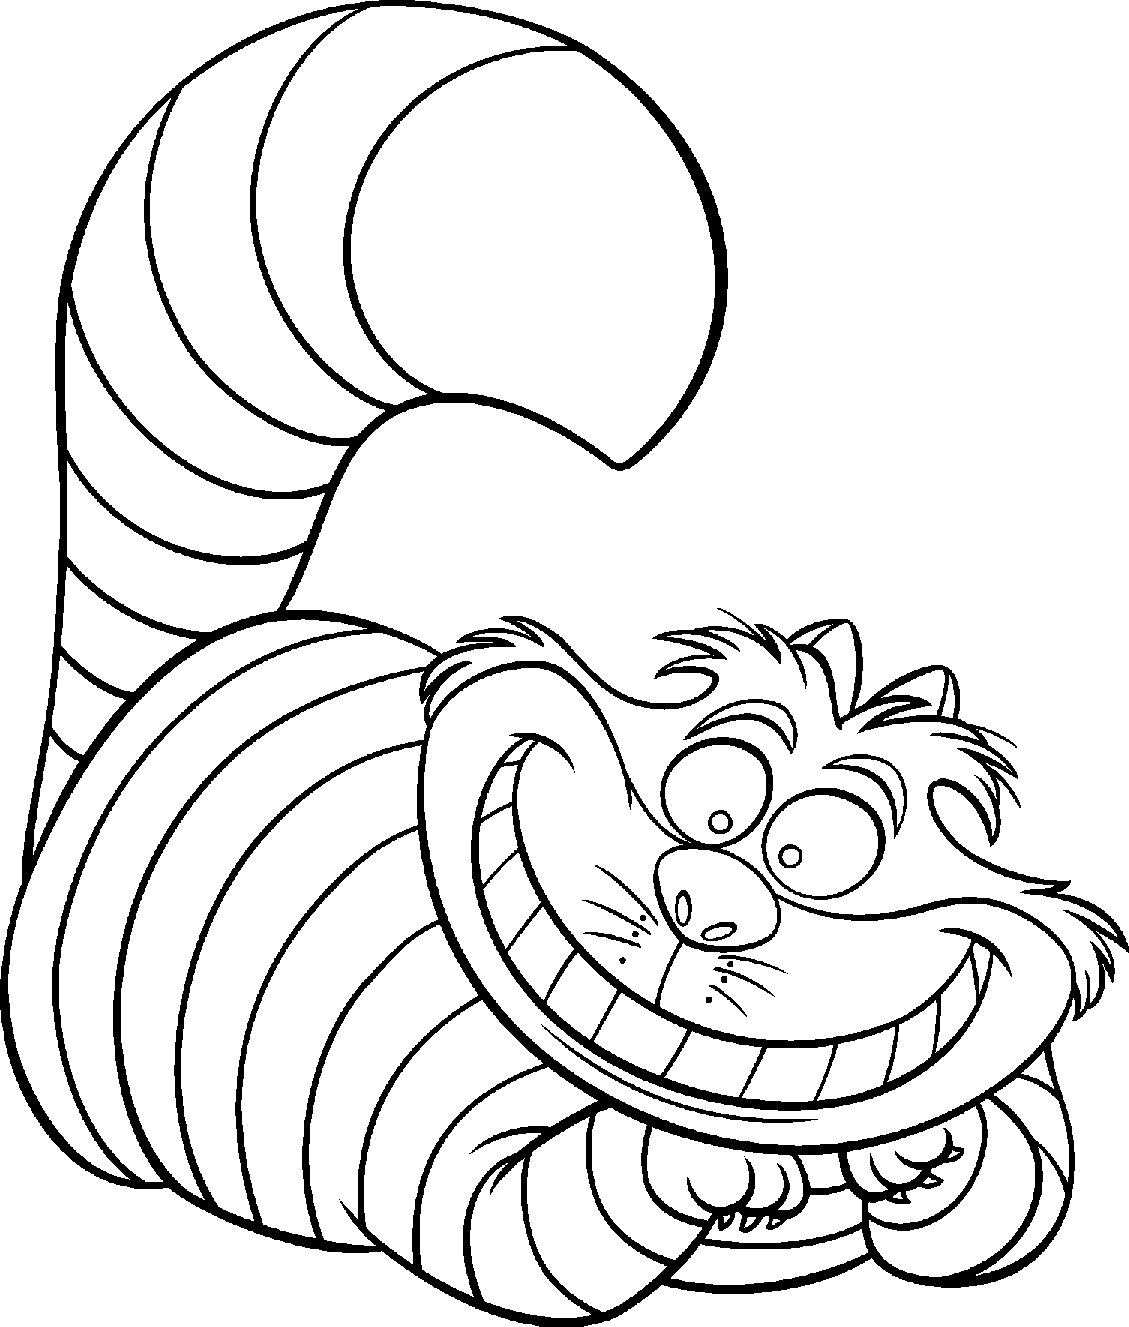 Kids Cartoon Colouring Pages Printable